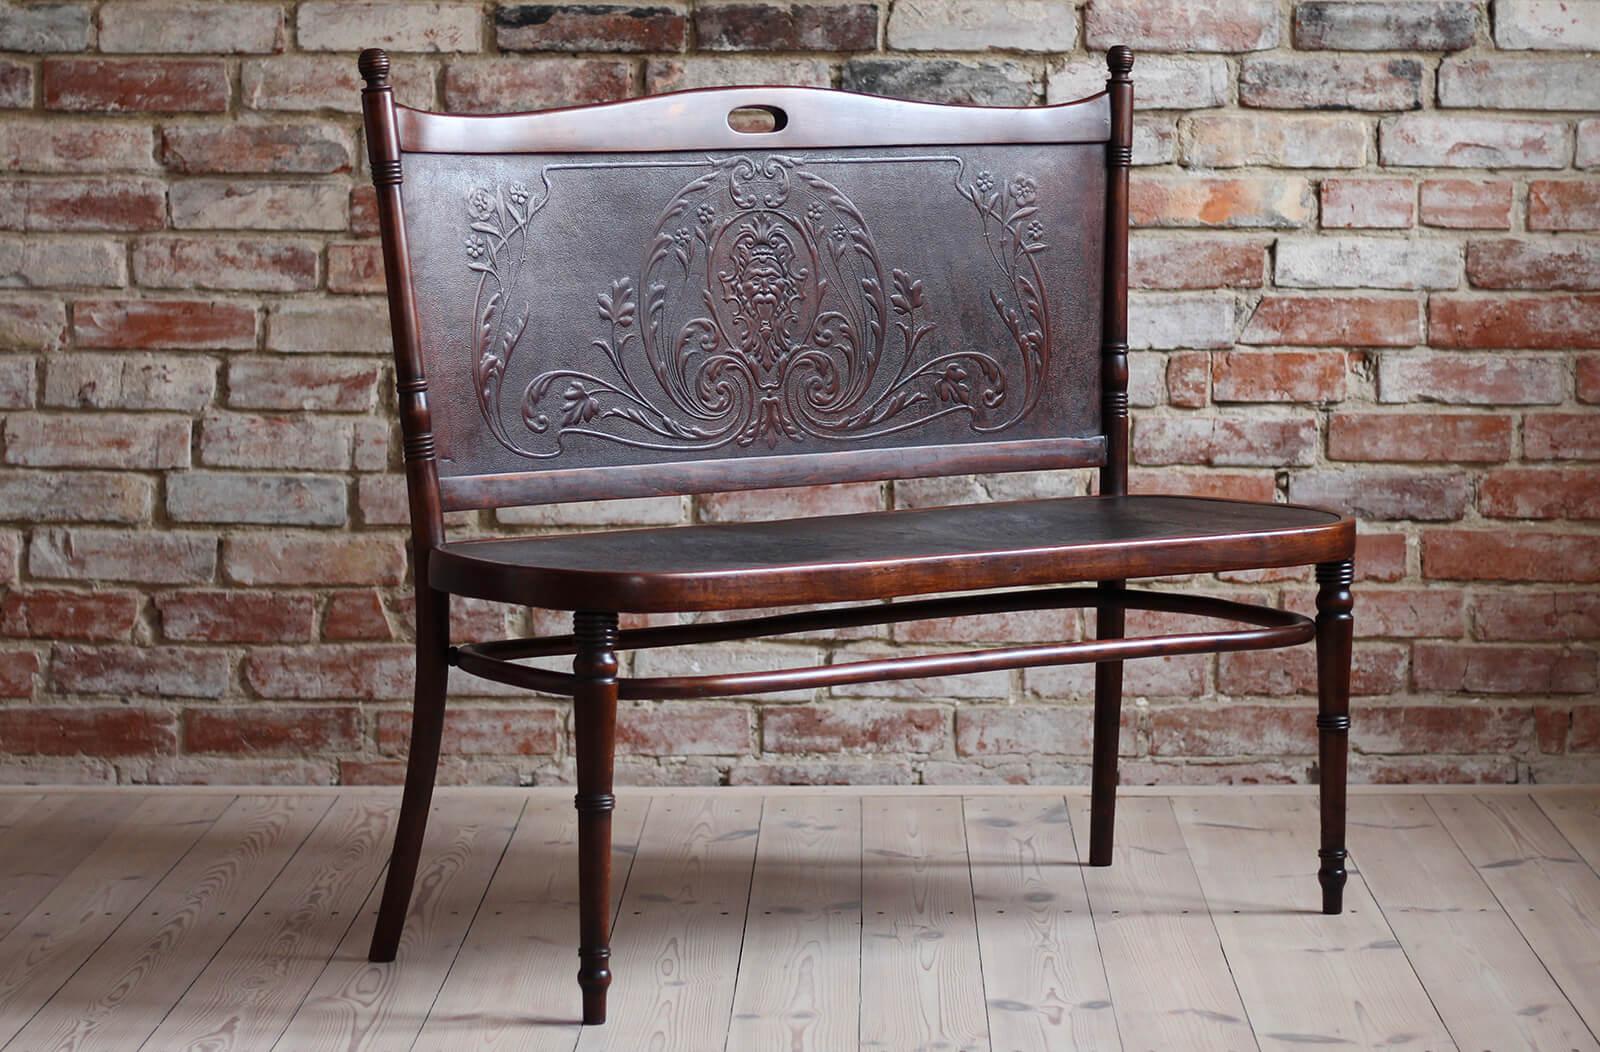 This exceptional bentwood bench settee was made in early 20th century and is attributed to Jacob & Josef Kohn. The bench features embossed plywood seat and back with characteristic bentwood wooden frame. There is no original label preserved however